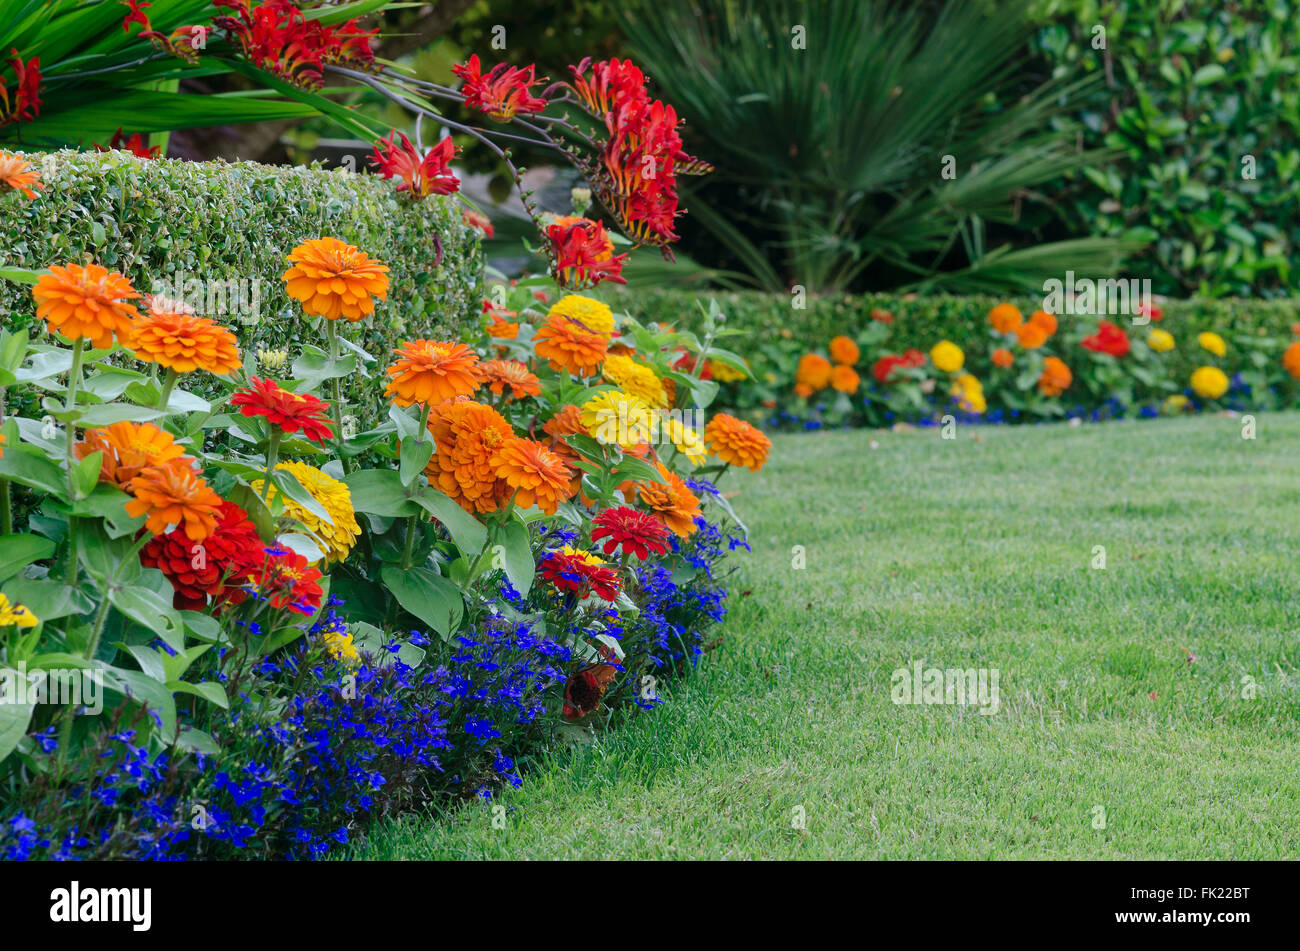 A close, ground-level view of a beautiful garden display featuring a boxwood hedge skirted by colorful zinnias and lobellia. Stock Photo